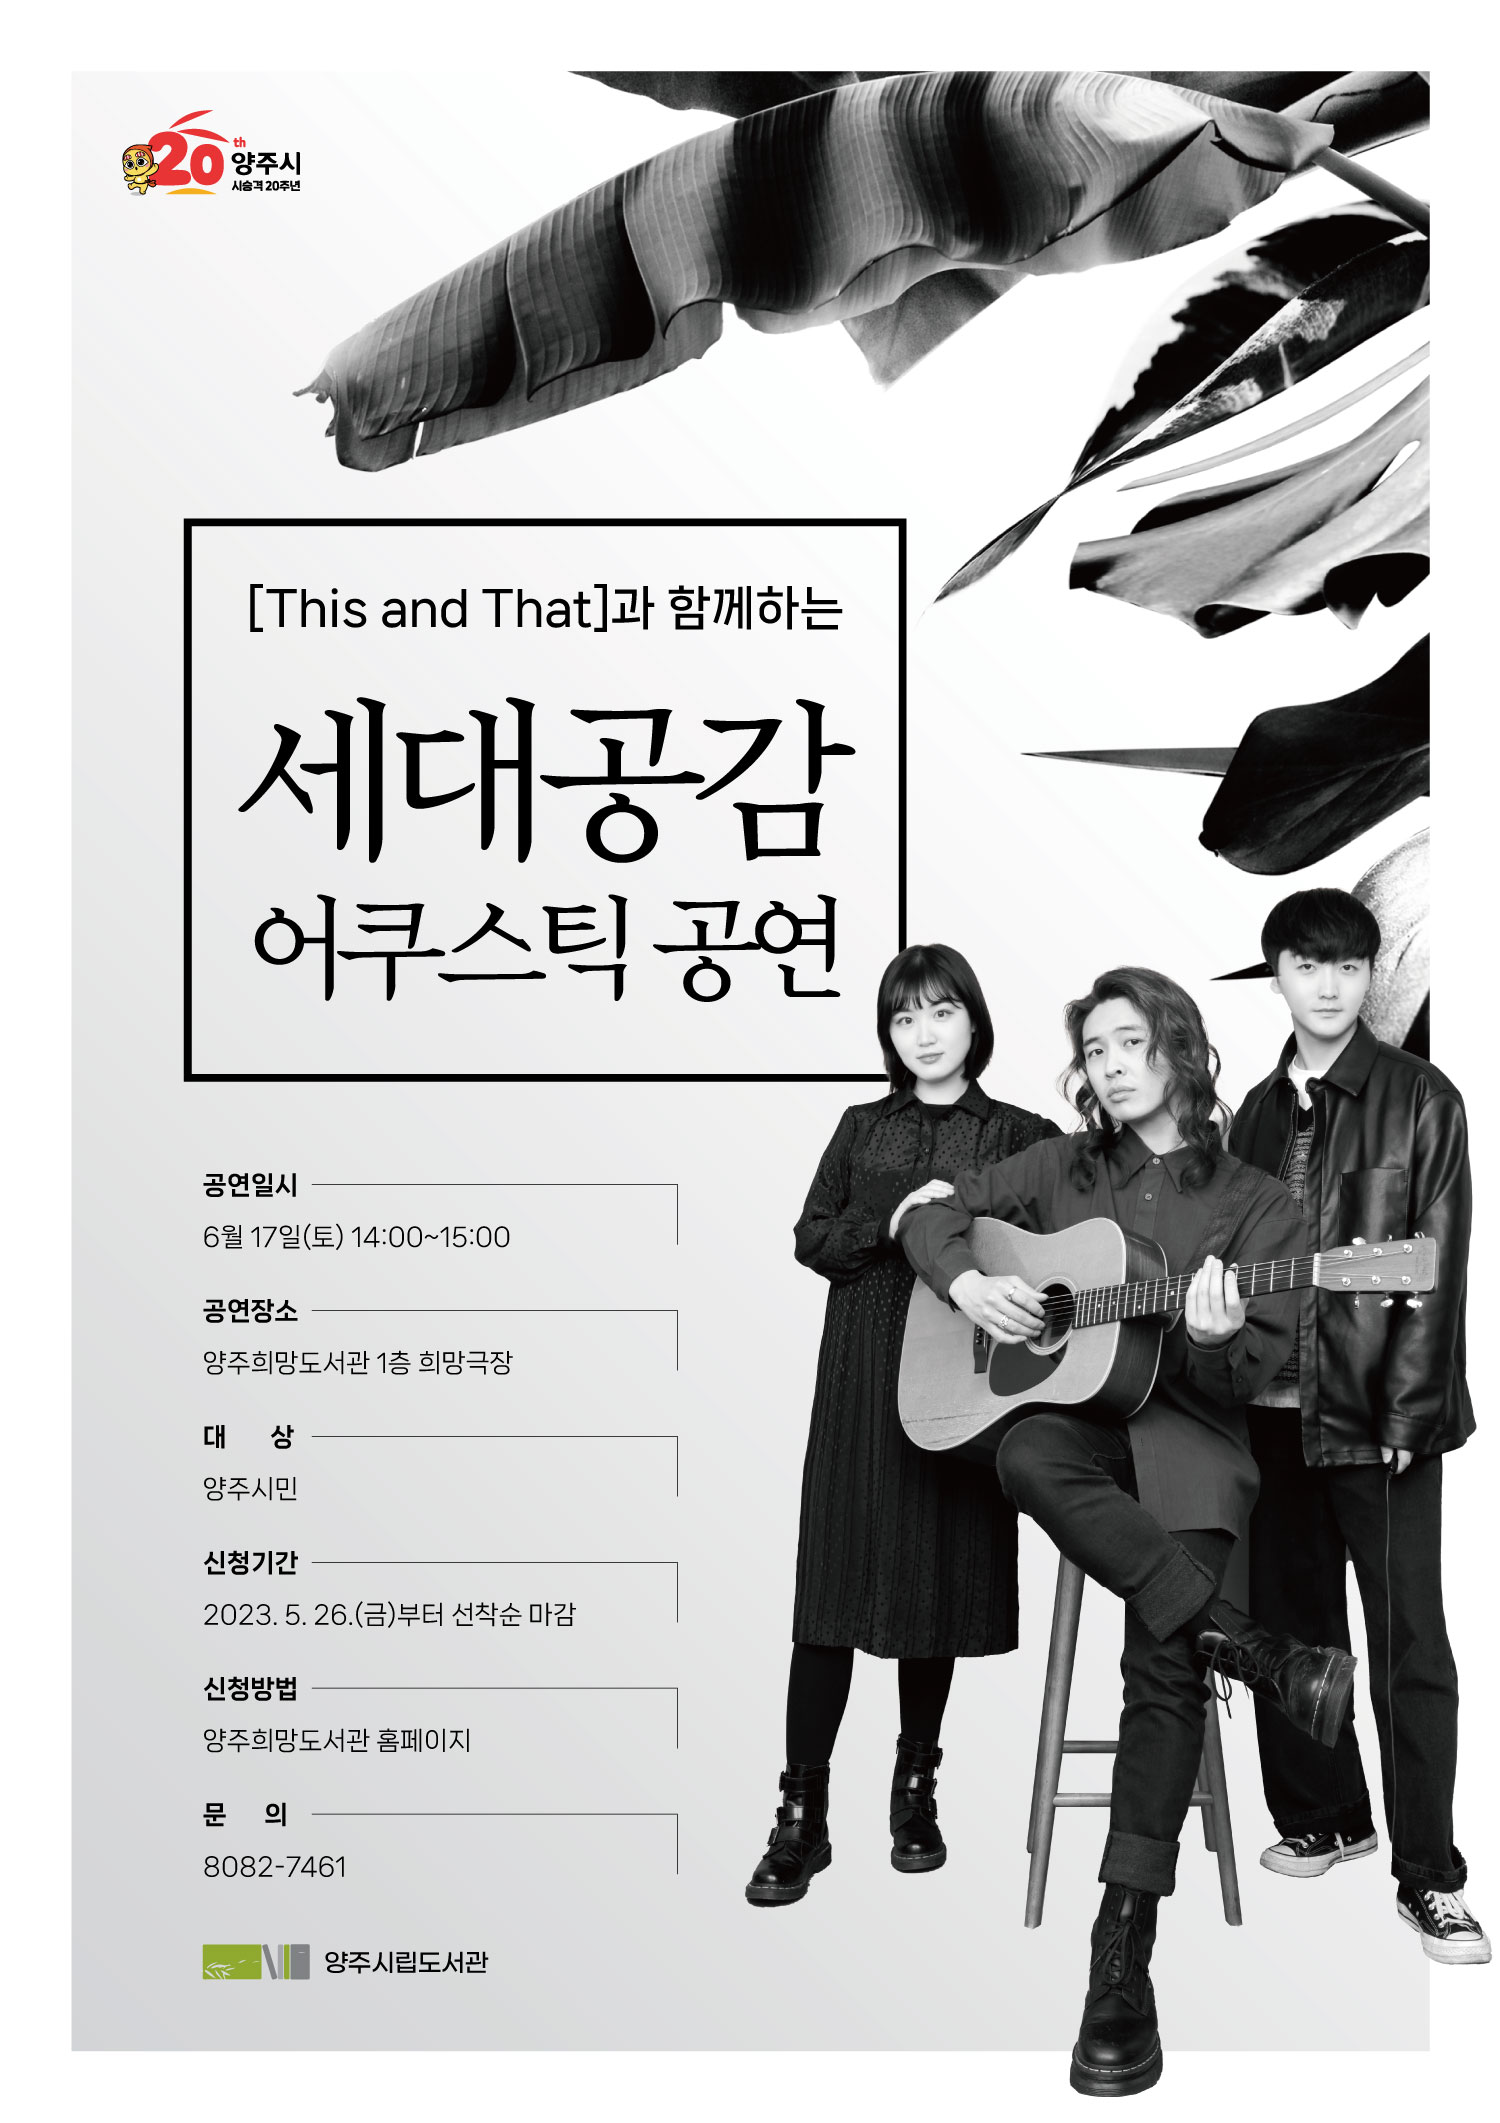 This and That [세대공감] 공연